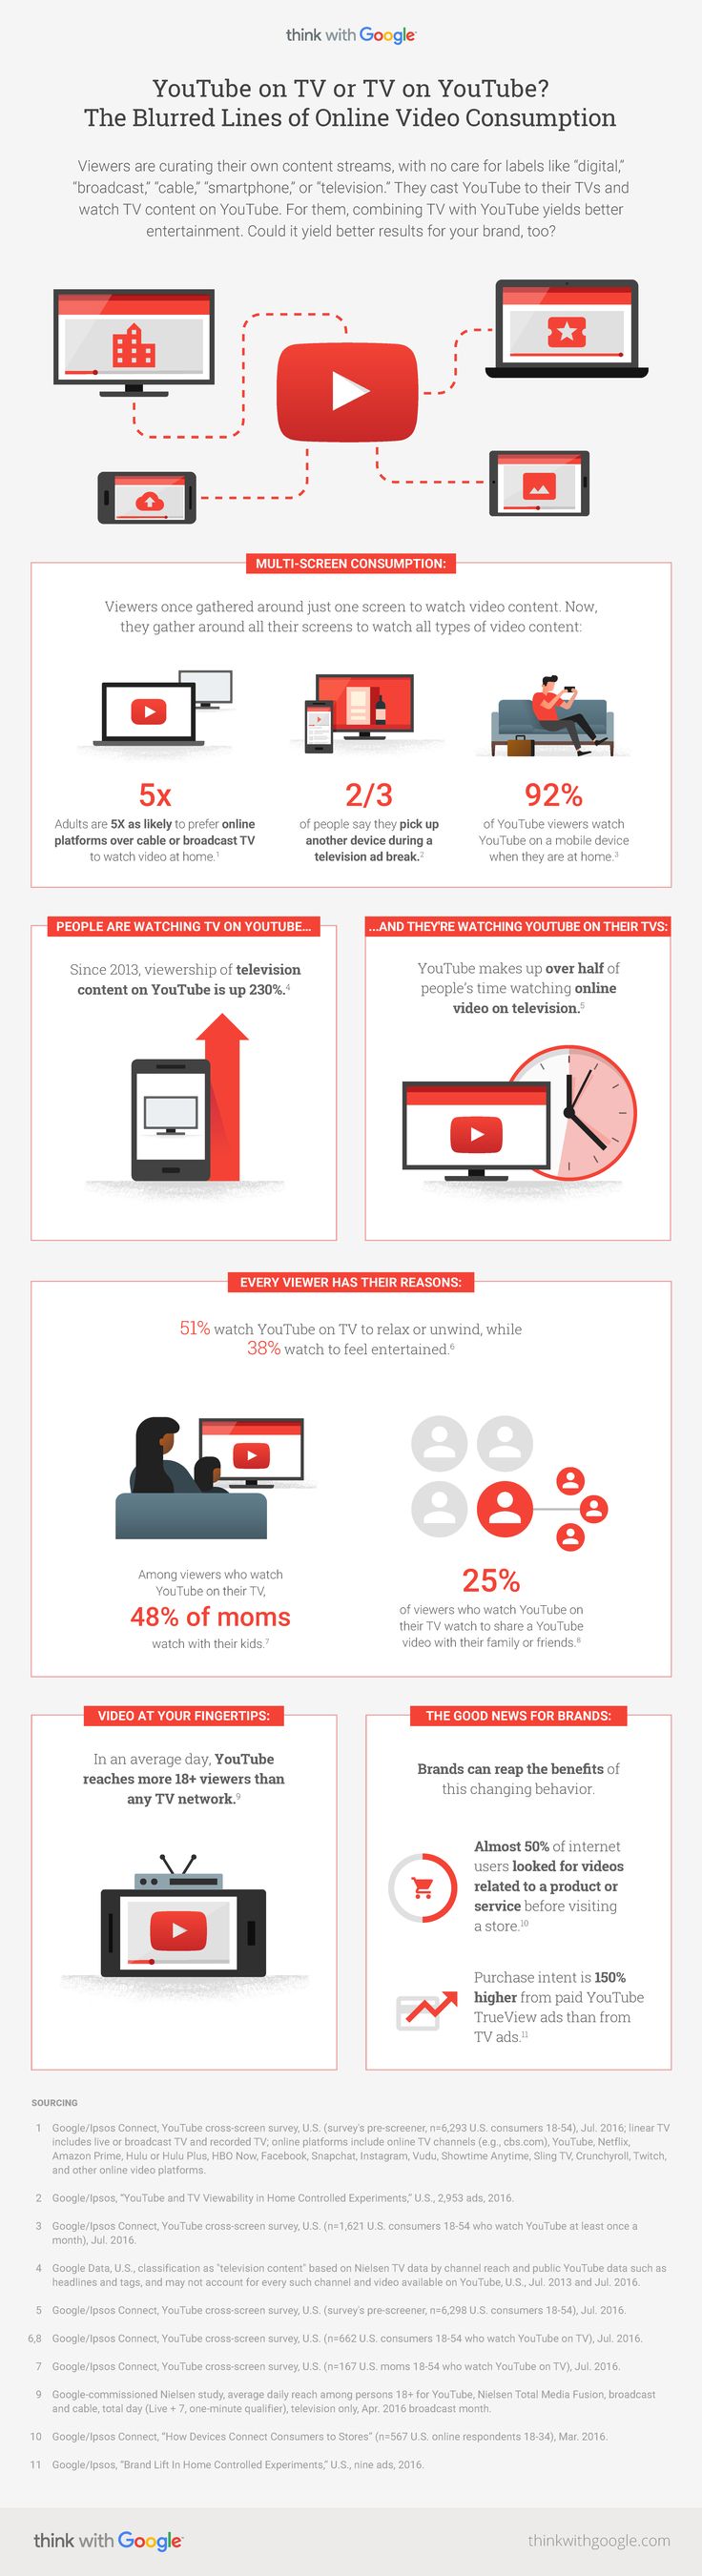 Marketing-Infographic-YouTube-on-TV-or-TV-on-YouTube-The-Blurred-Lines-of-Online-Video-Consumption Marketing Infographic : #YouTube on #TV  or TV on YouTube? The Blurred Lines of Online Video Consumption...